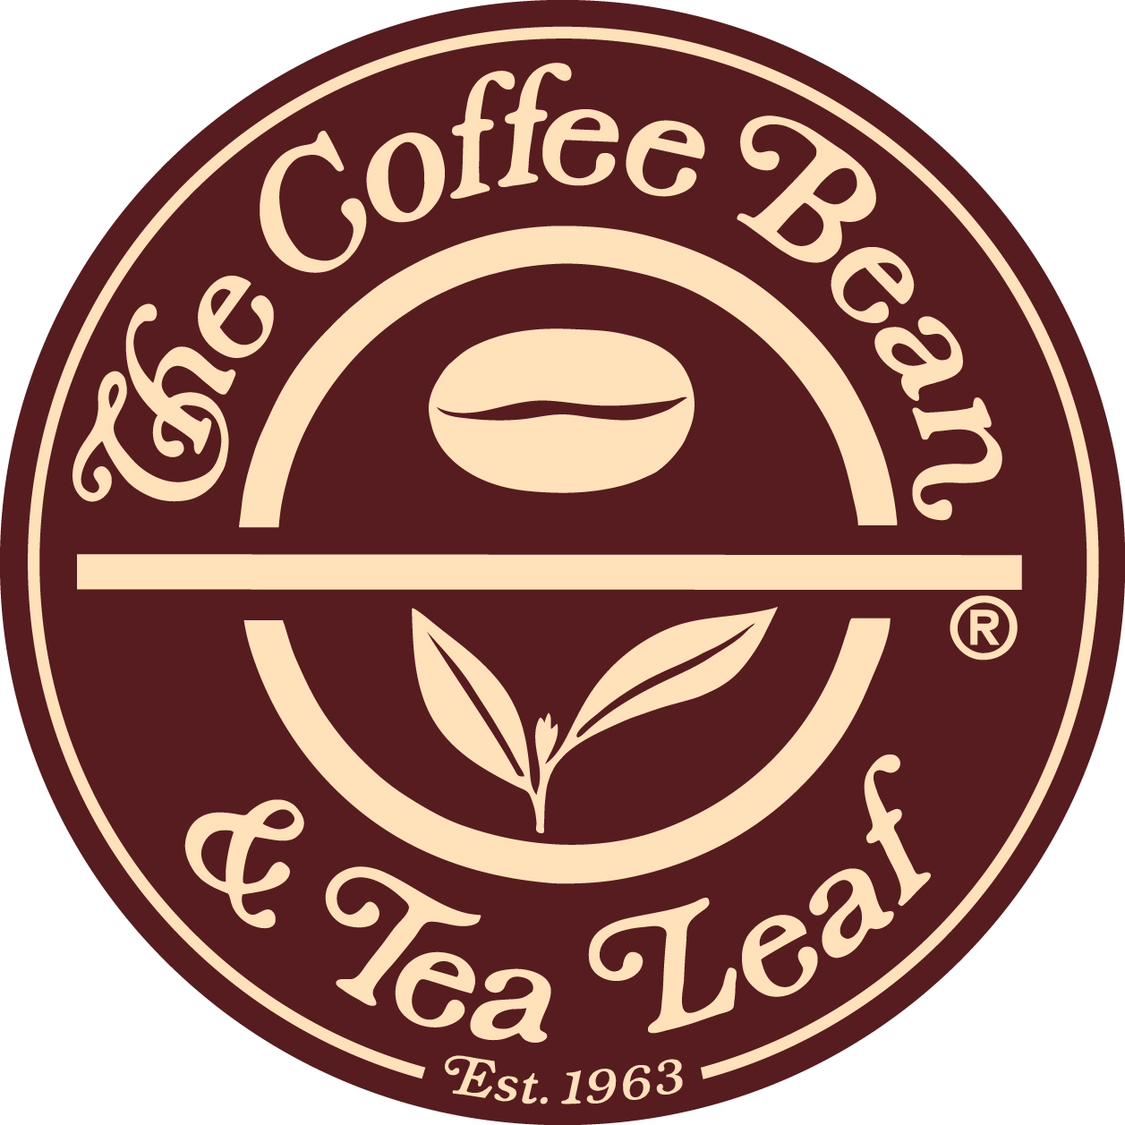 Coffee Bean's images